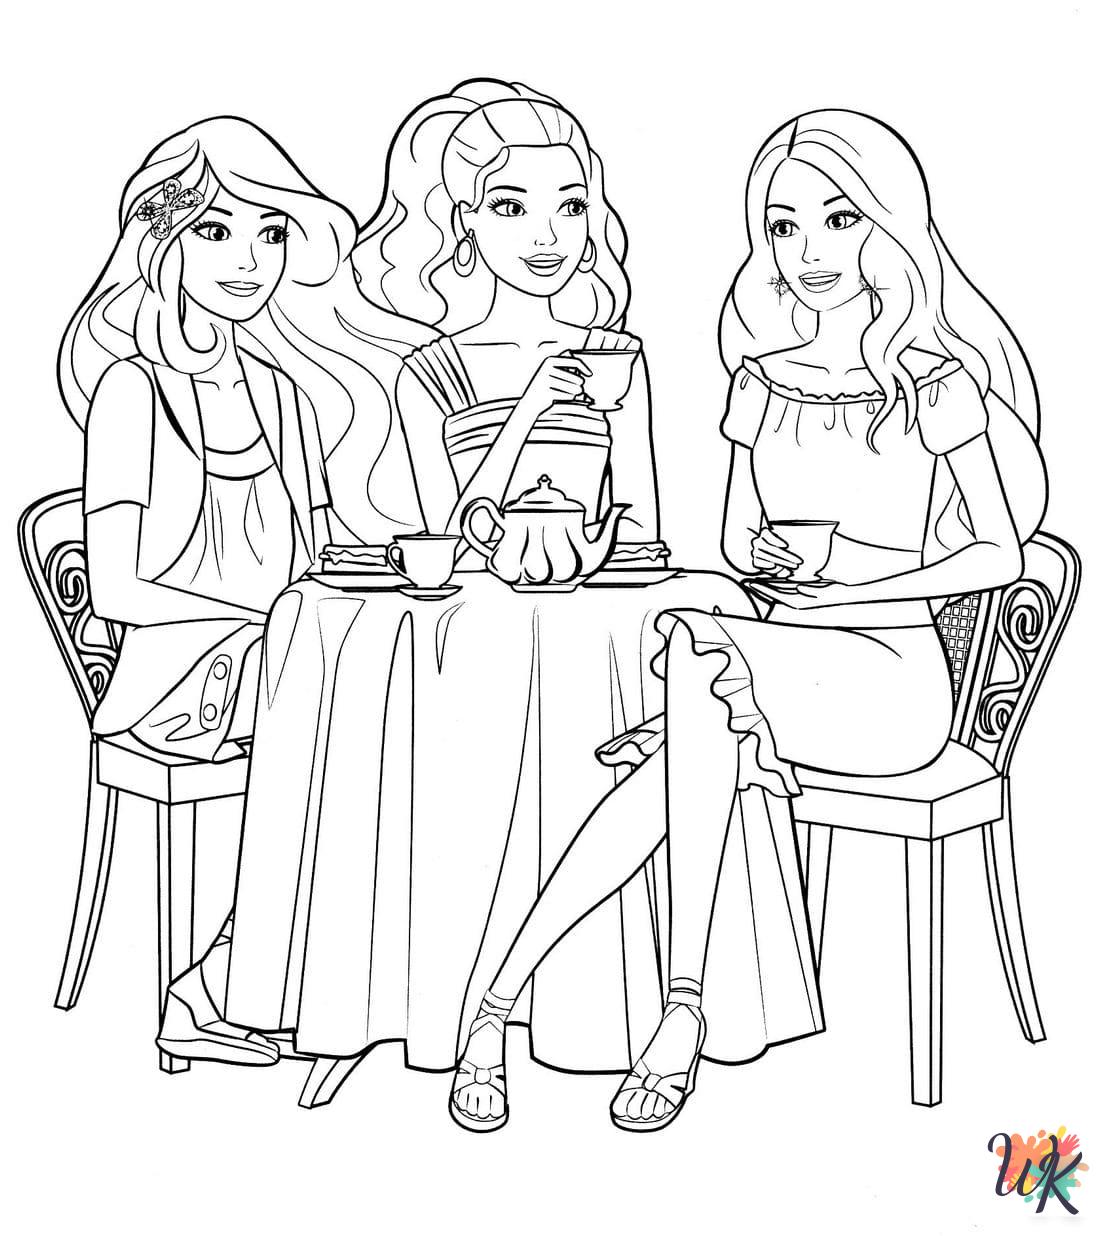 Barbie coloring pages to print